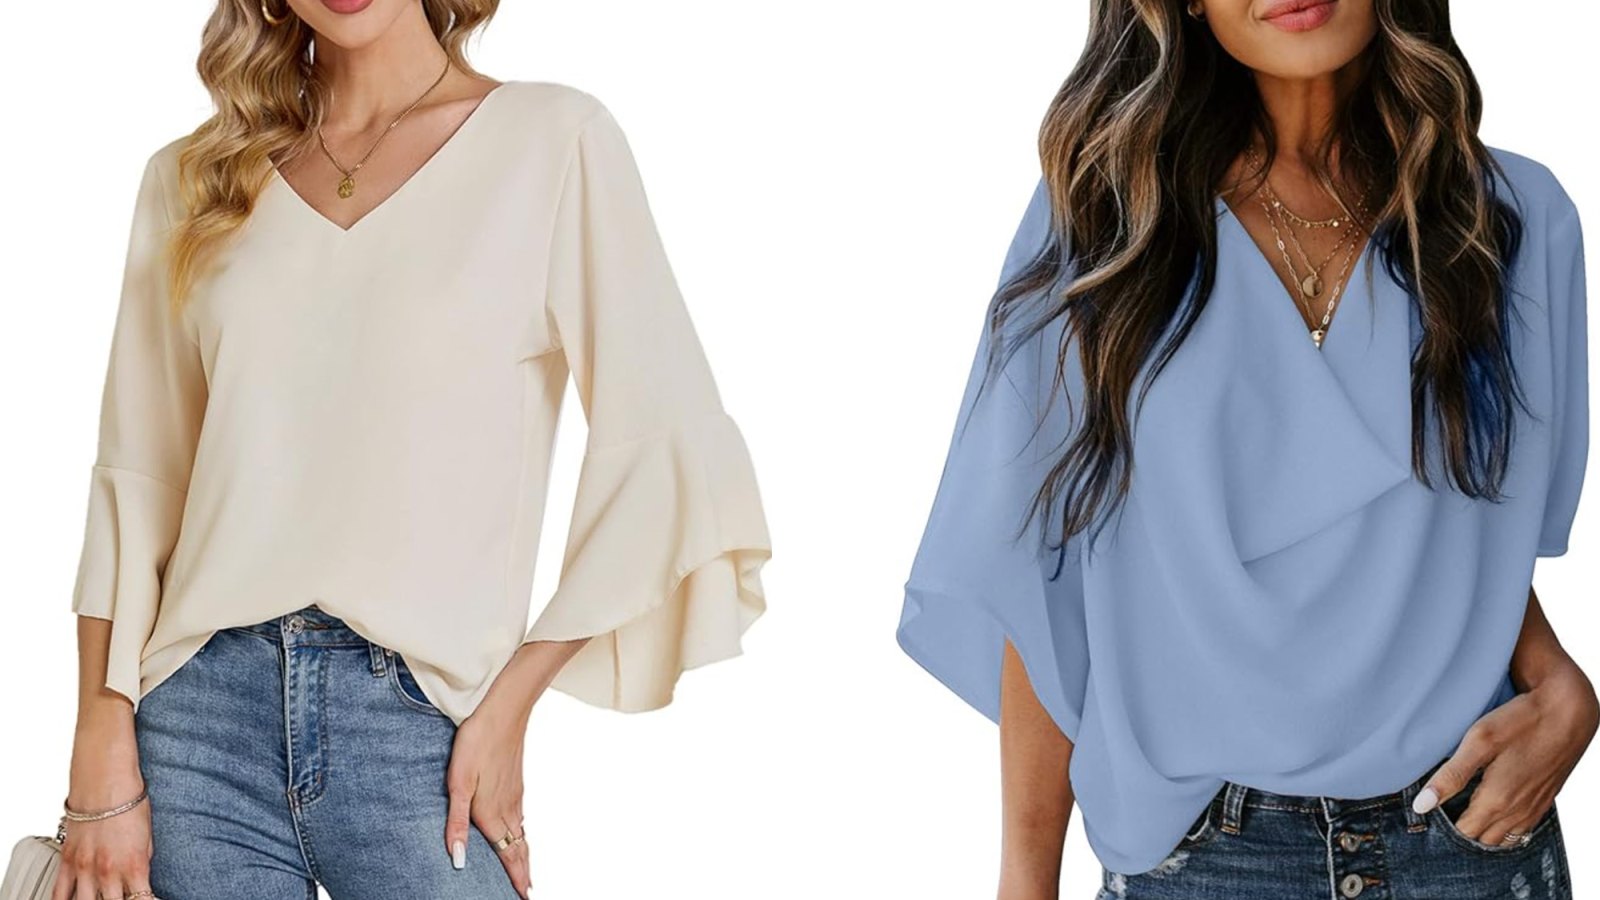 Chic transitional tops